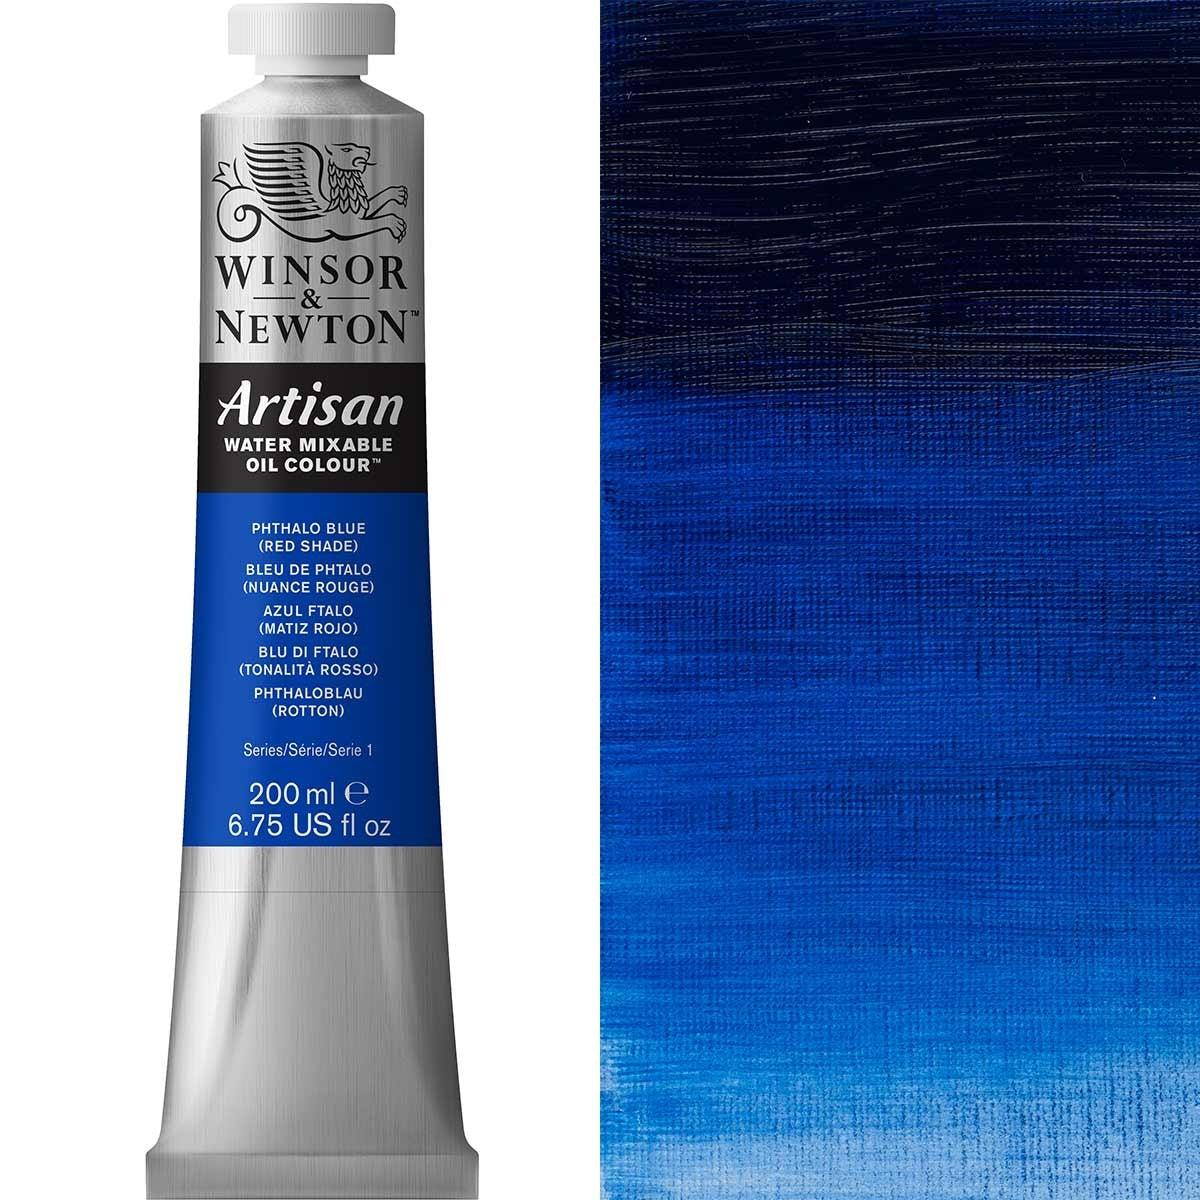 Winsor and Newton - Artisan Oil Colour Watermixable - 200ml - Phthalo Blue Red Shade